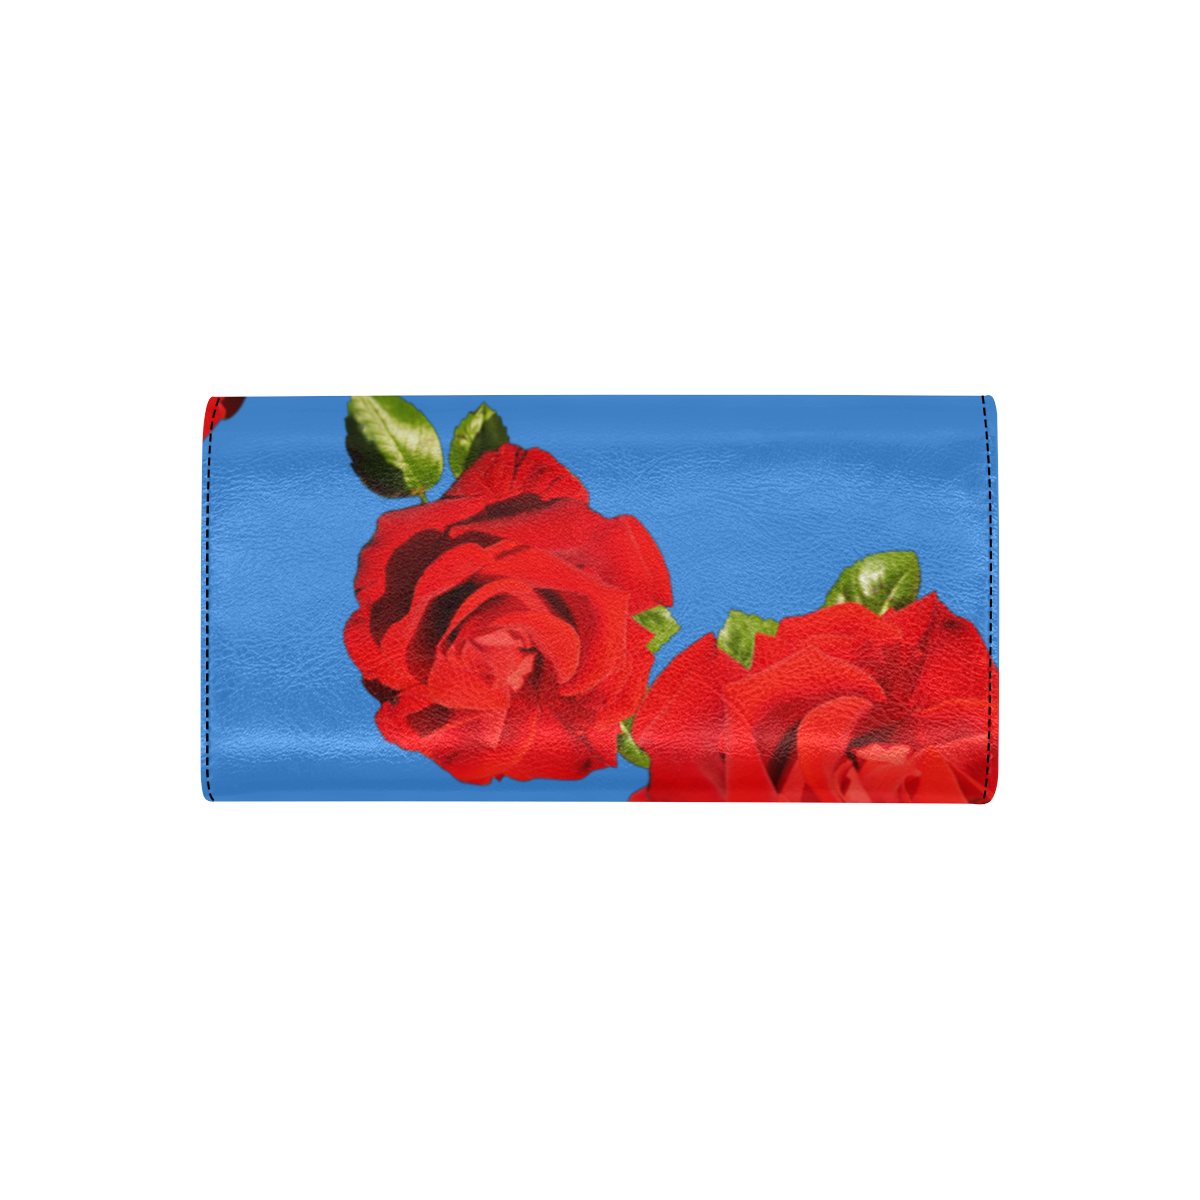 Fairlings Delight's Floral Luxury Collection- Red Rose Women's Flap Wallet 53086c6 Women's Flap Wallet (Model 1707)